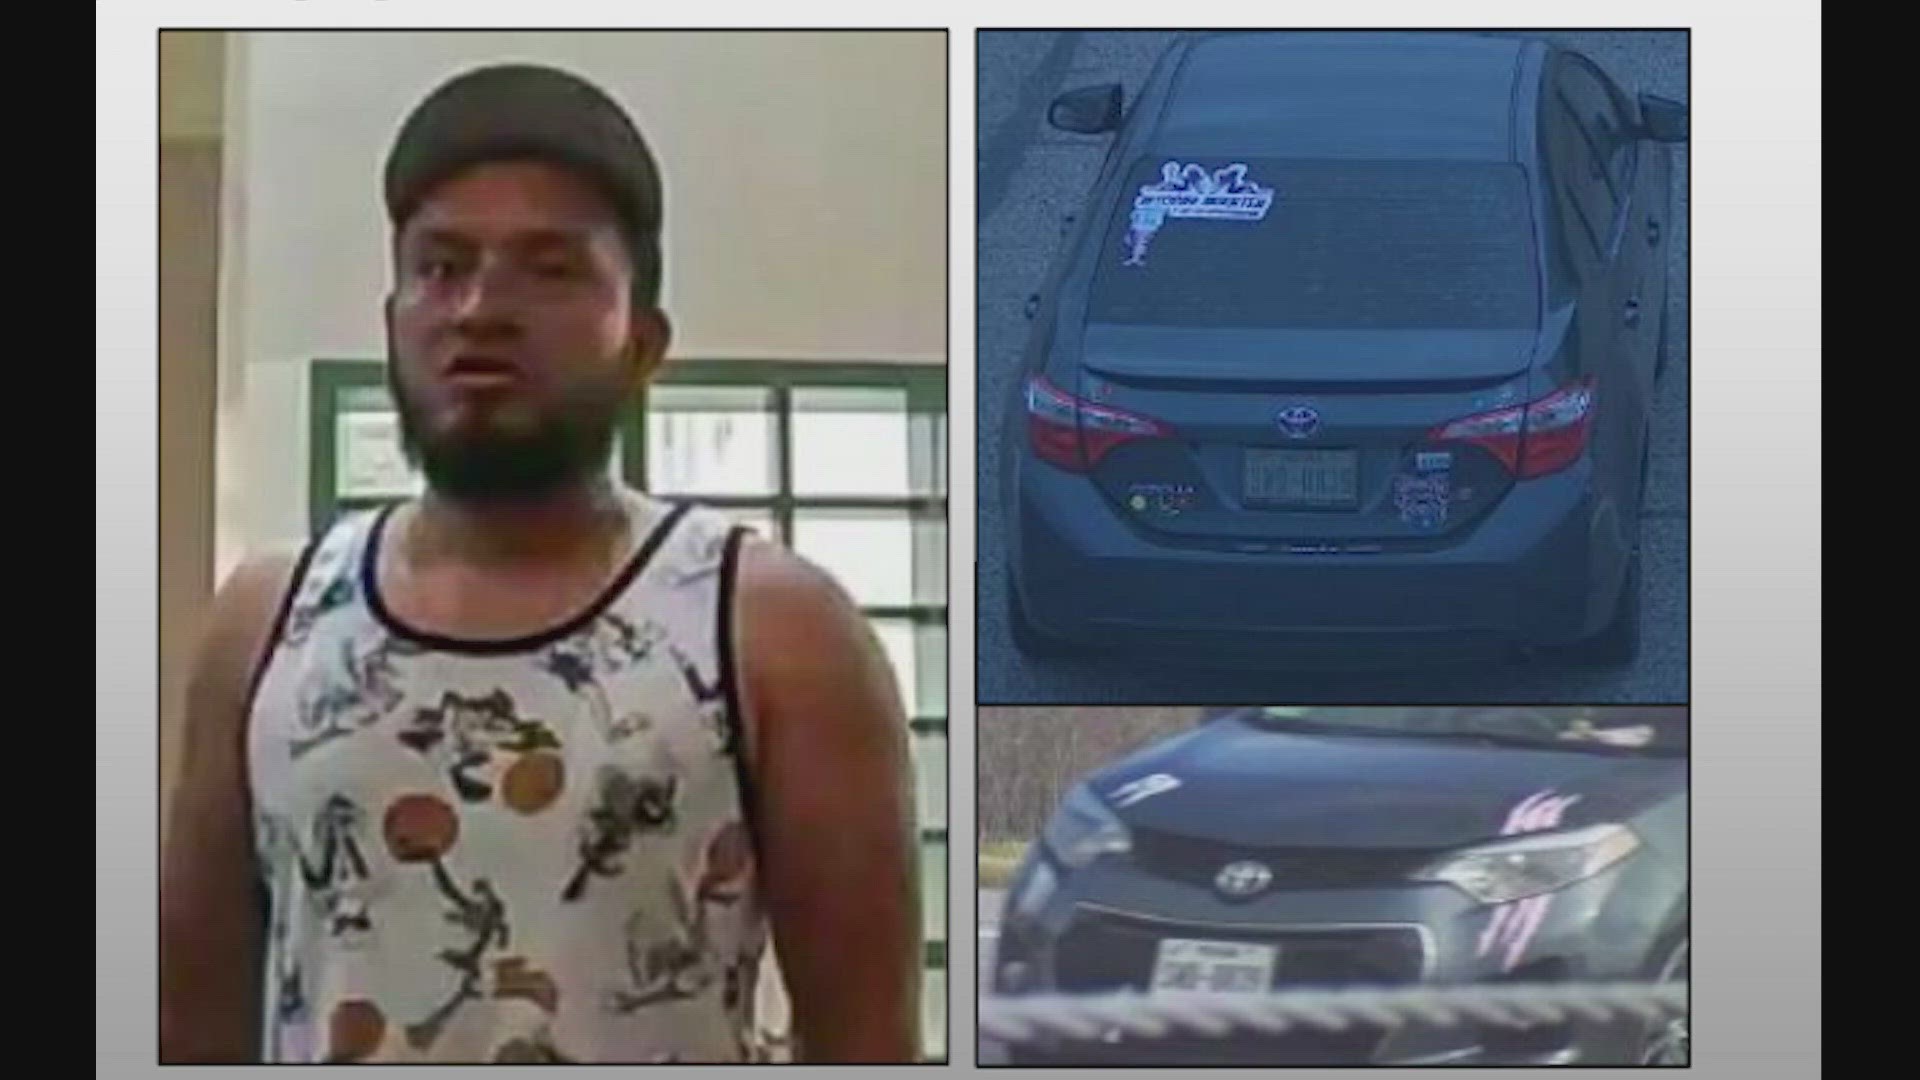 The Irving Police Department said they have reason to believe 32-year-old Erik Natanael Amador Godoy may have traveled to South Texas after the shooting.